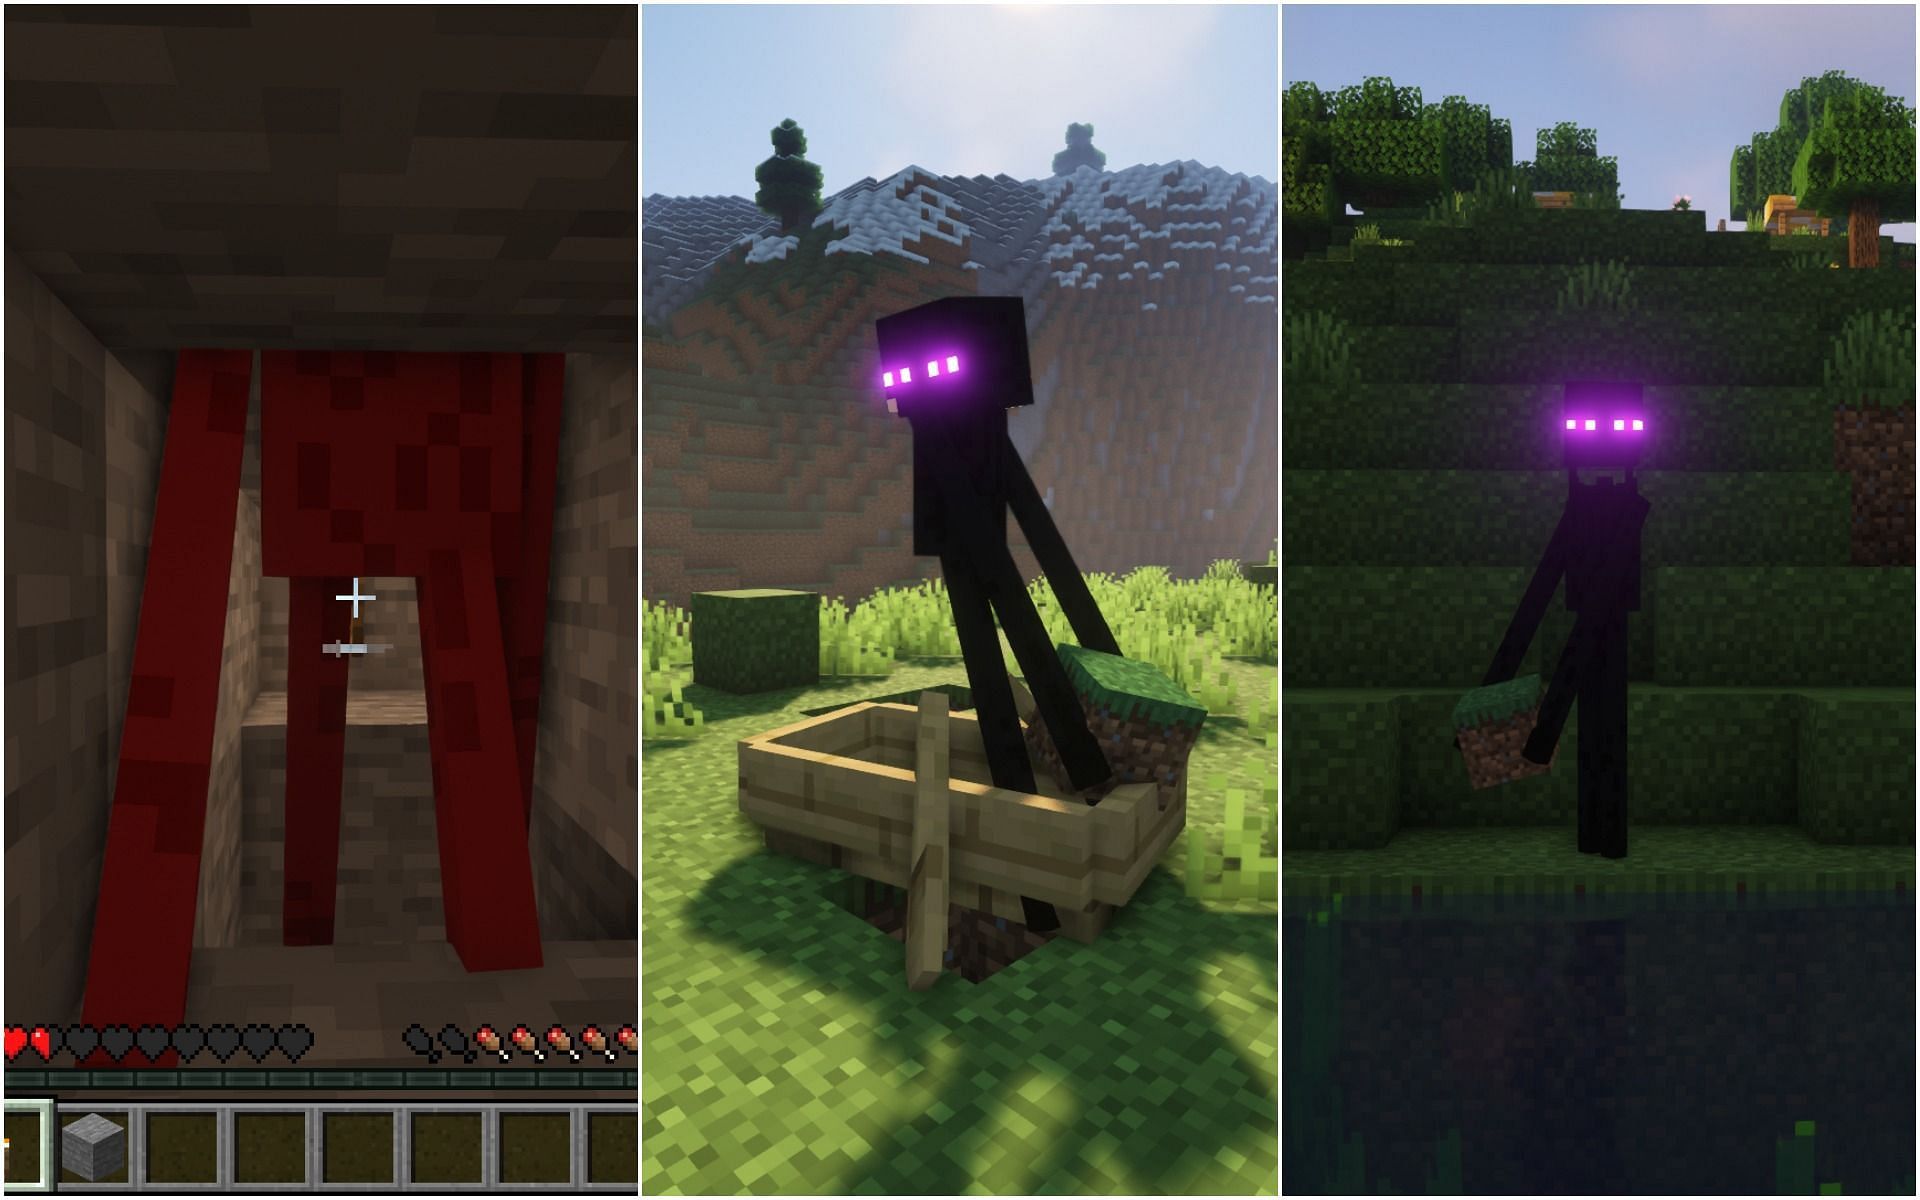 angry enderman face